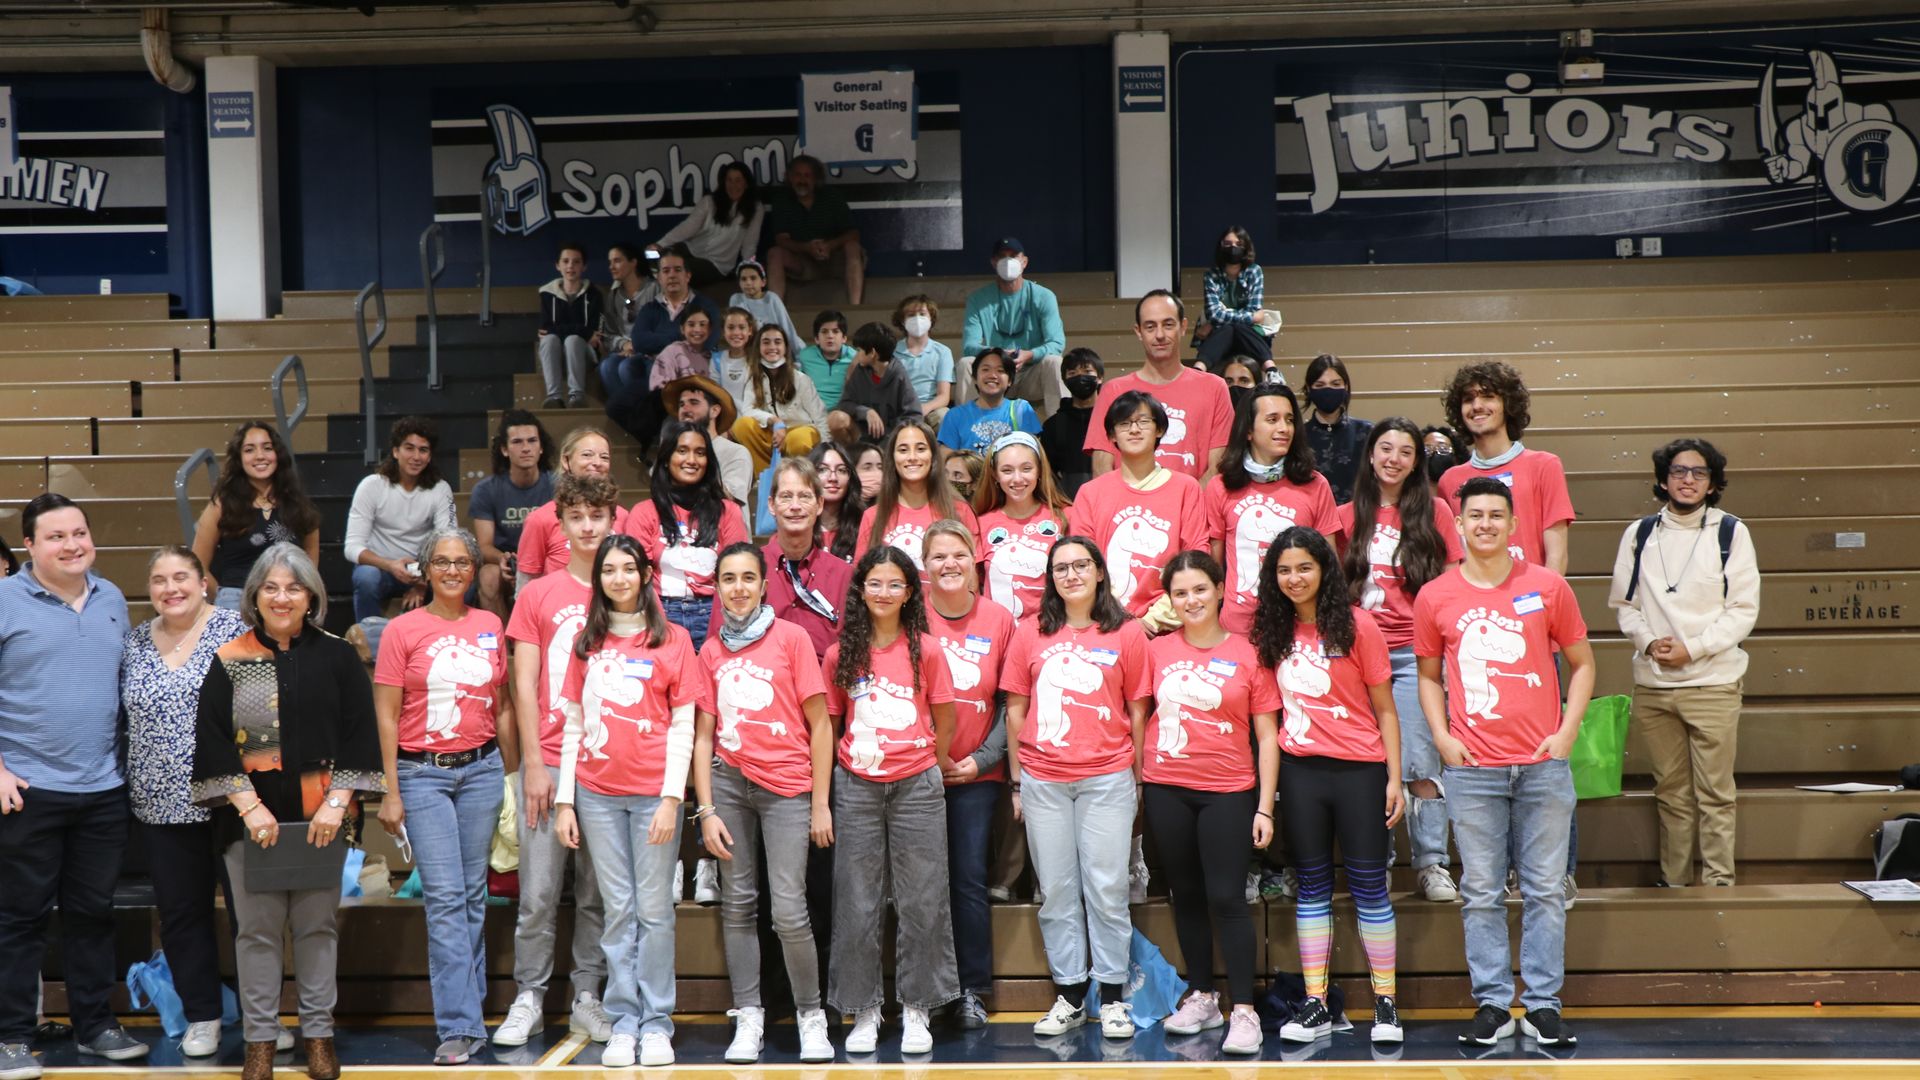 A group of teens wearing pink t-shirts poses in front of wooden school bleachers. 